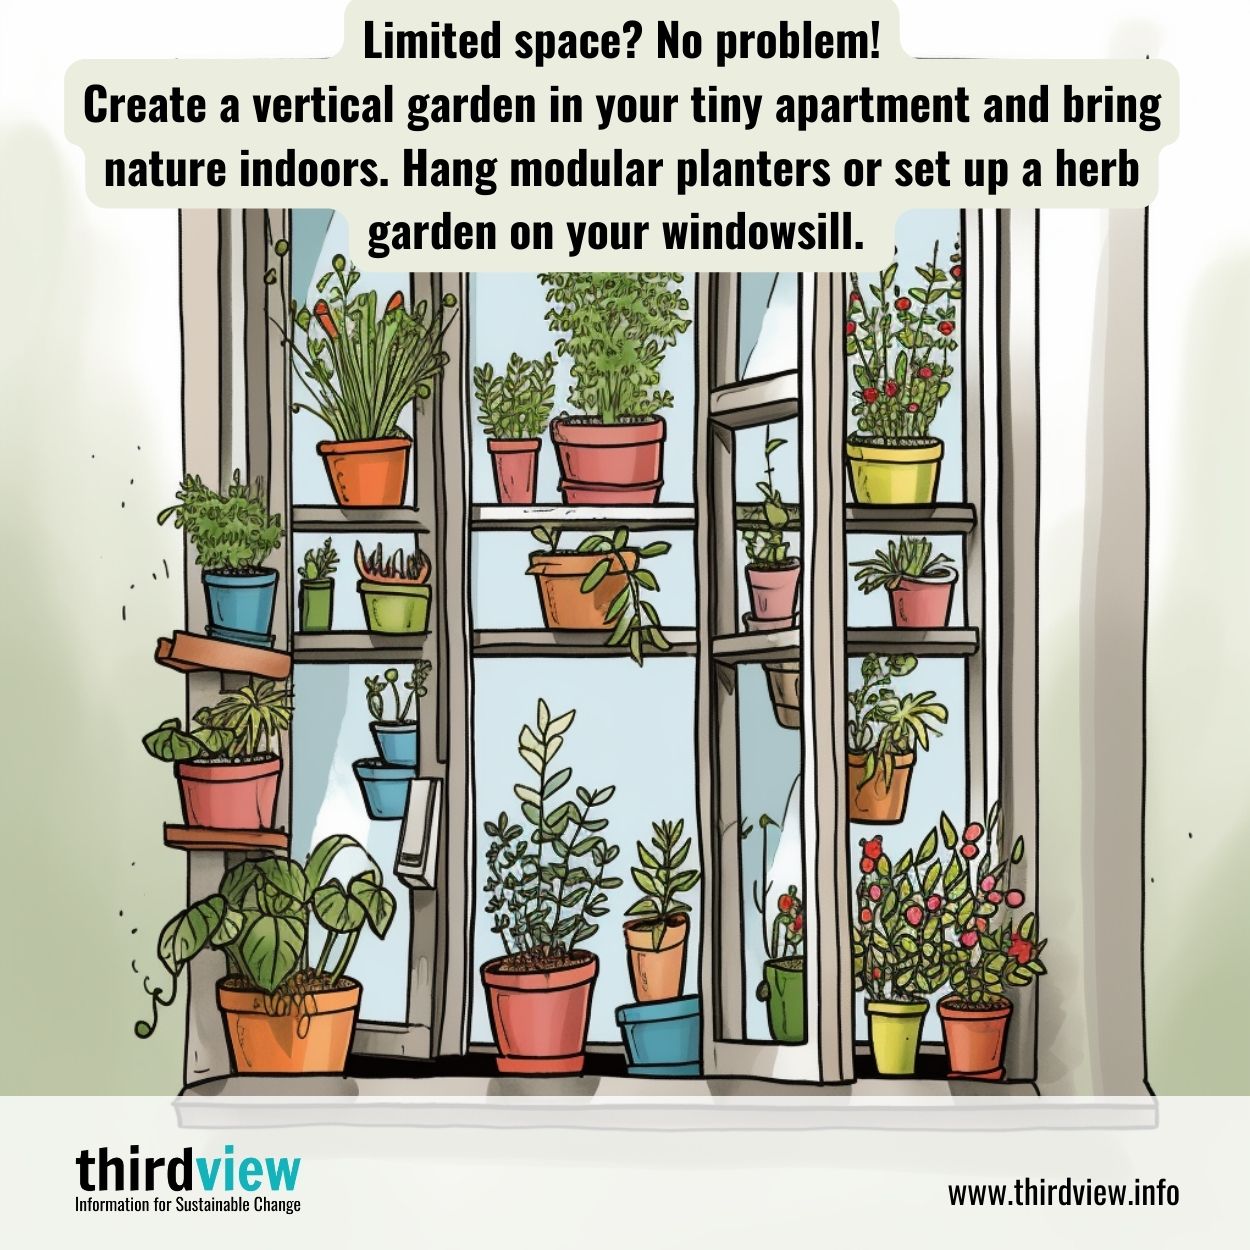 Create a vertical garden in your tiny apartment and bring nature indoors. Hang modular planters or set up a herb garden on your windowsill